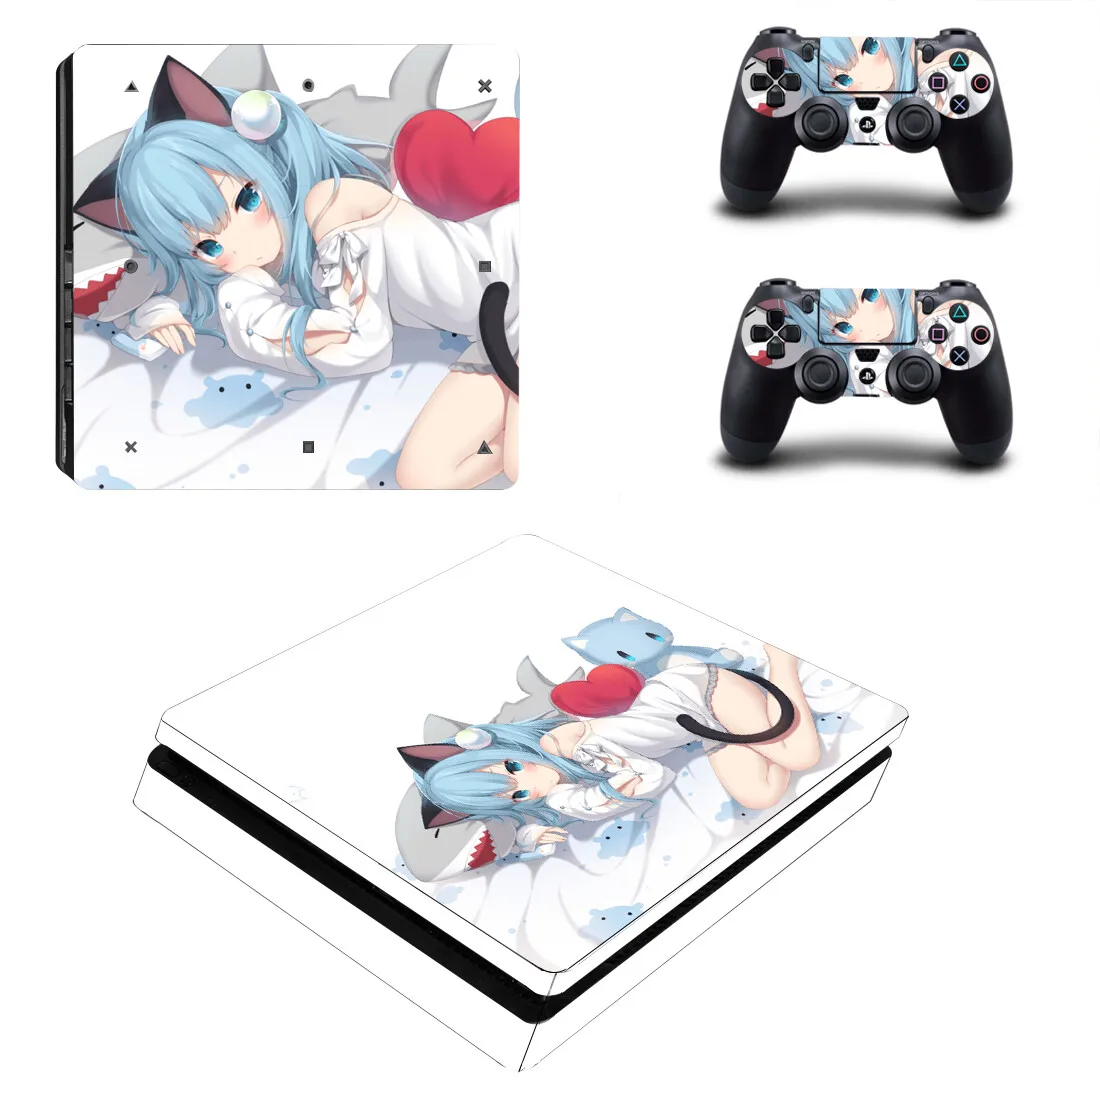 

Anime Cute Girl PS4 Slim Skin Sticker For Sony PlayStation 4 Console and Controllers PS4 Slim Skins Sticker Decal Vinyl